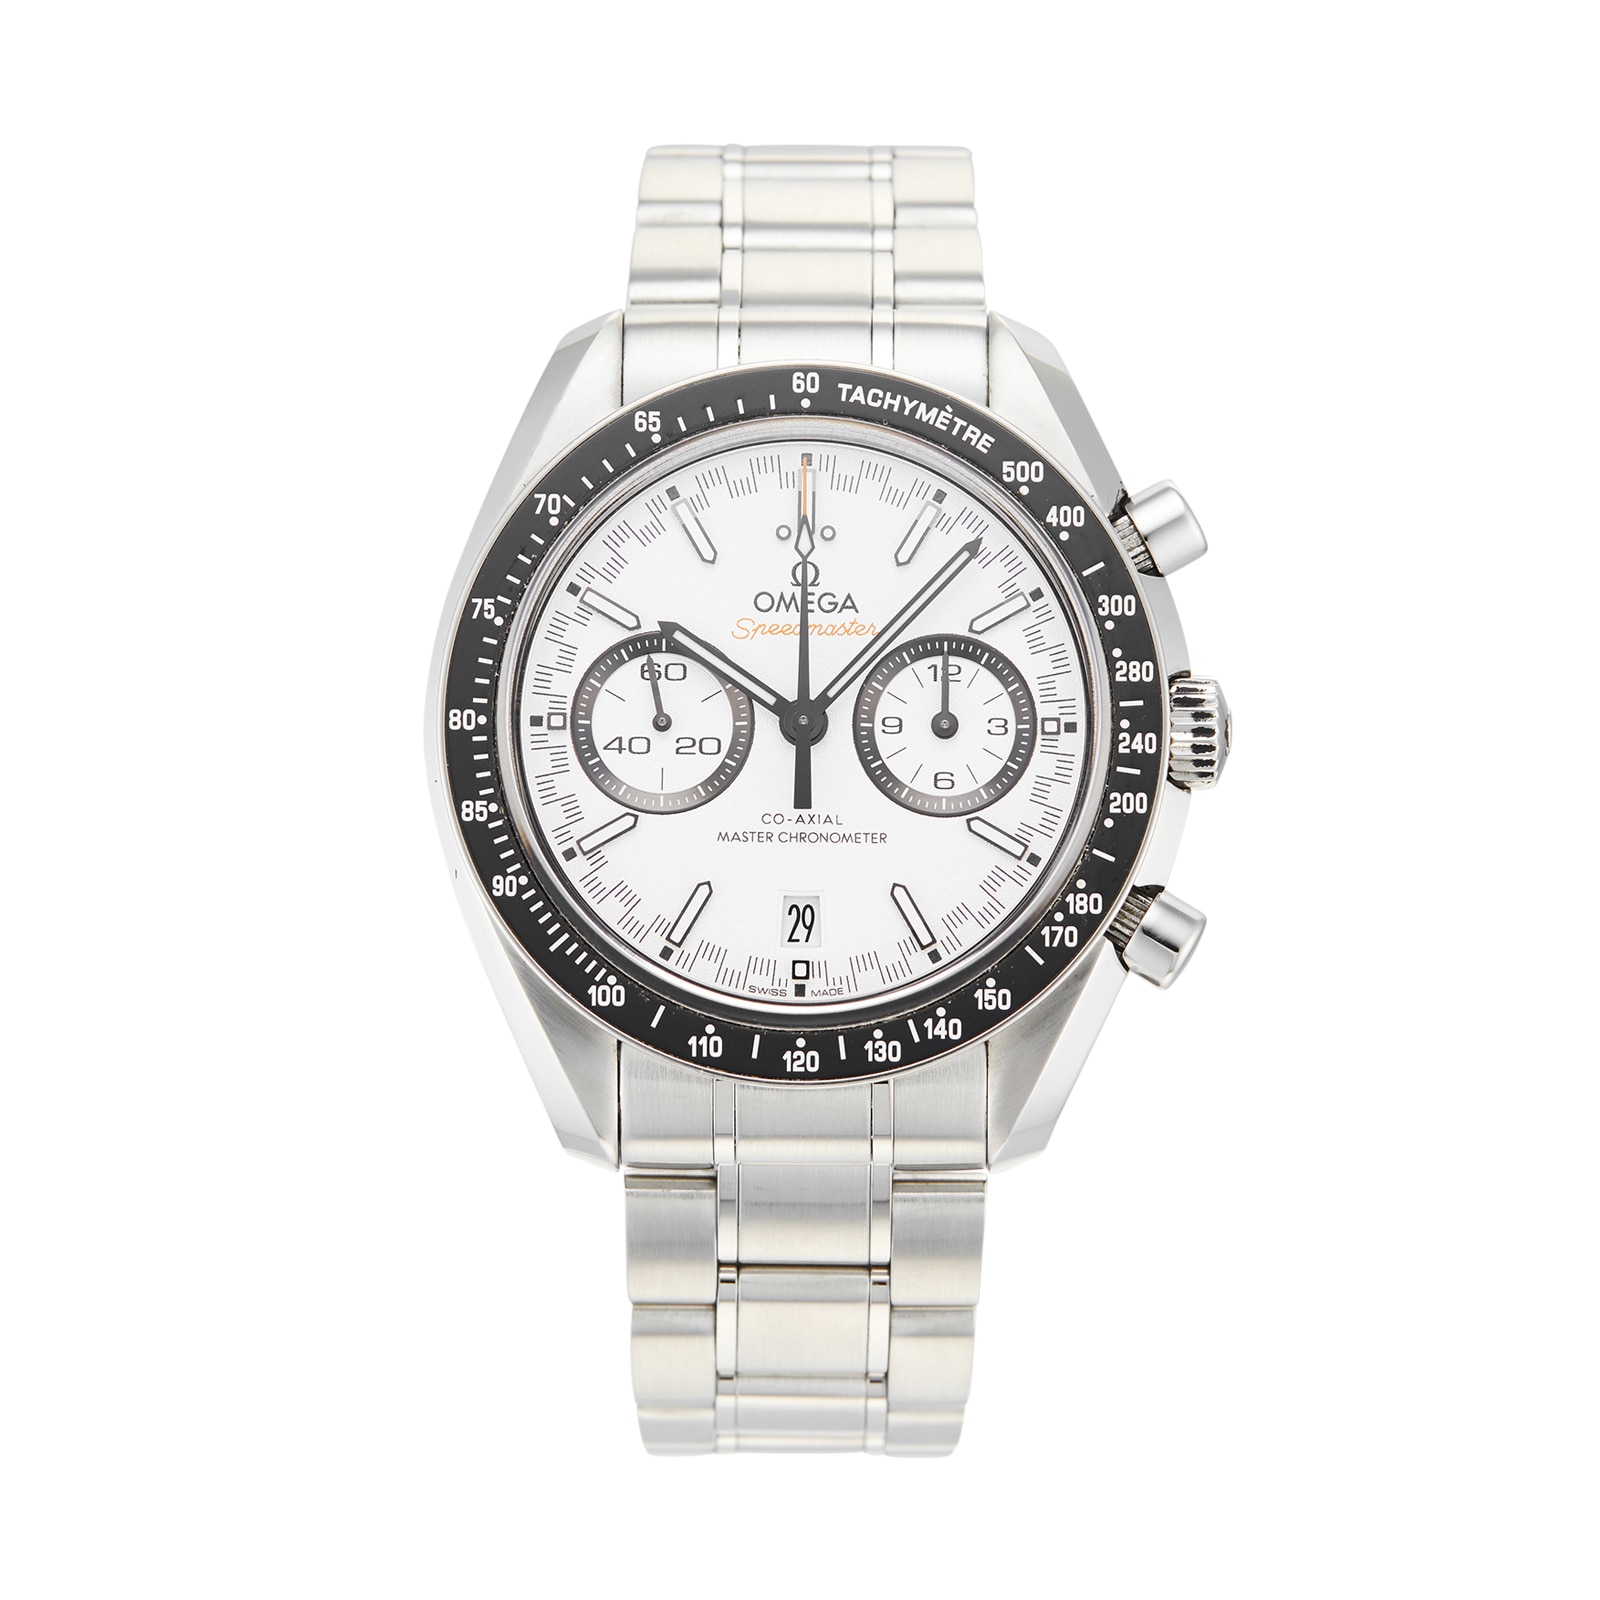 Pre-Owned OMEGA Speedmaster Racing Master Chronometer Chronograph 44.25m Automatic Mens Watch 329.30.44.51.04.001